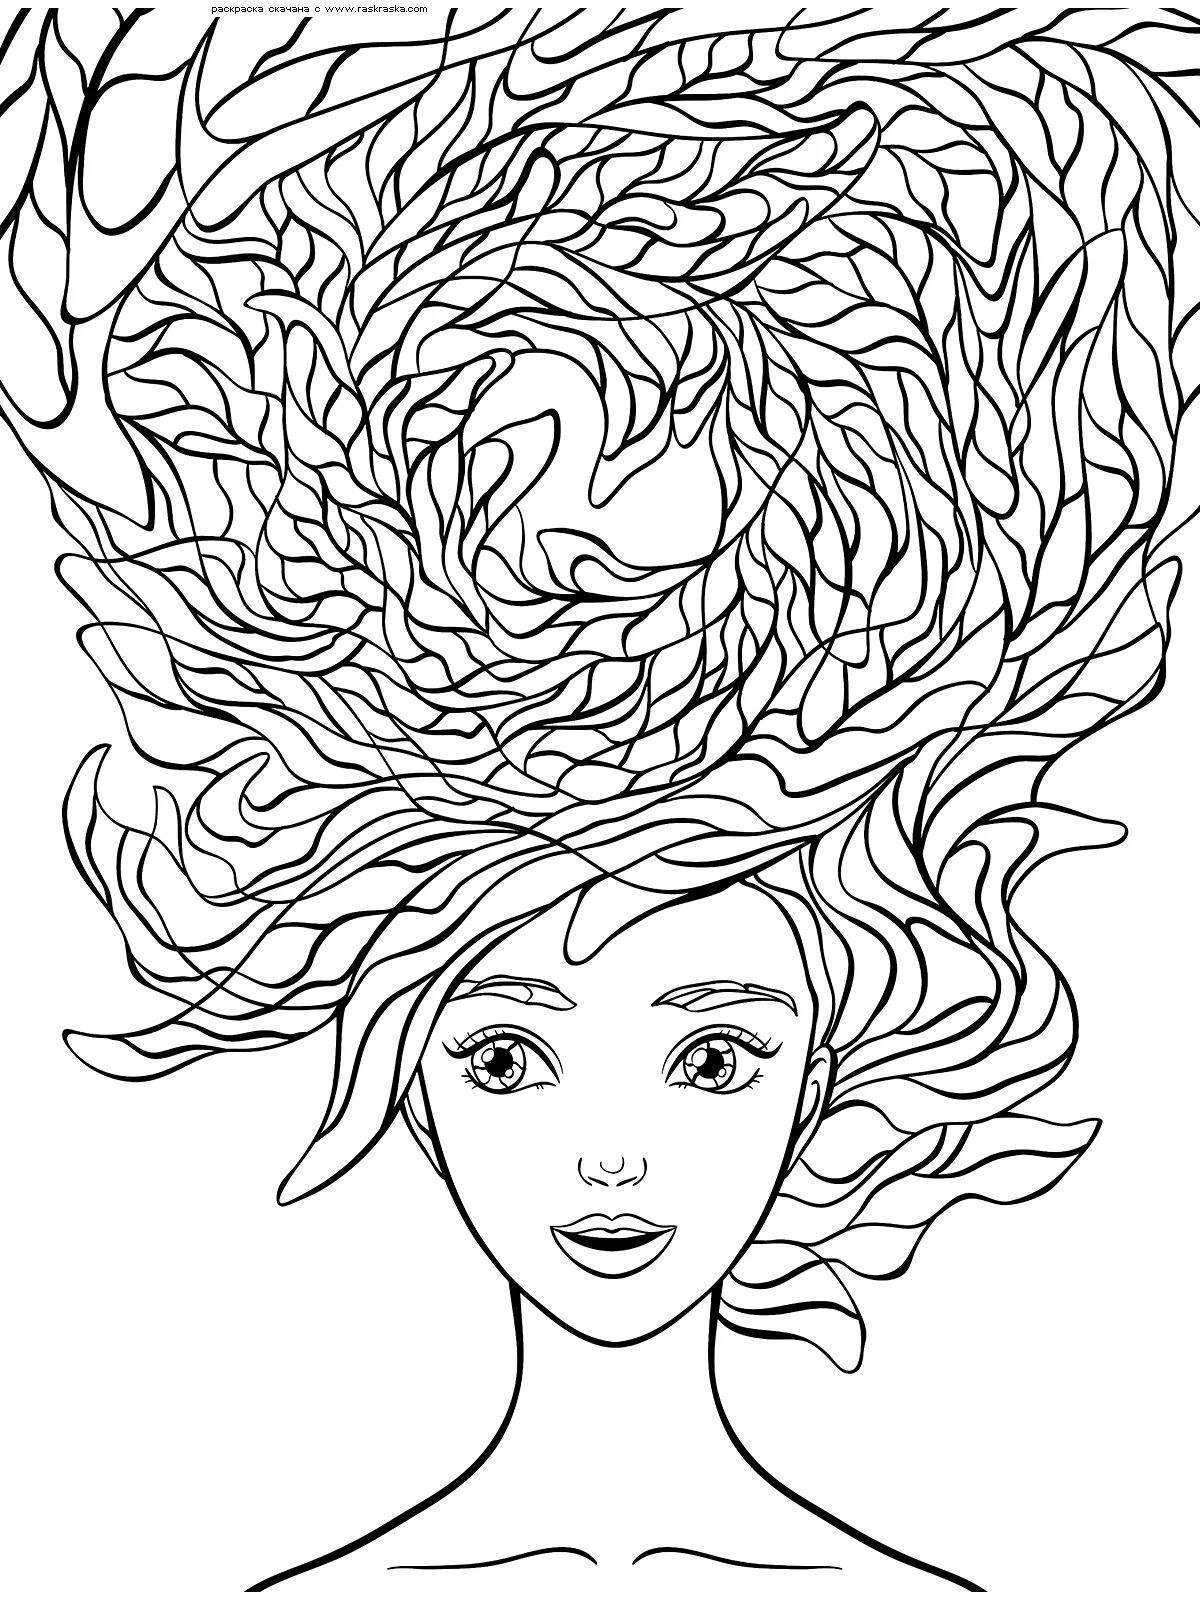 Adorable girls hair coloring page